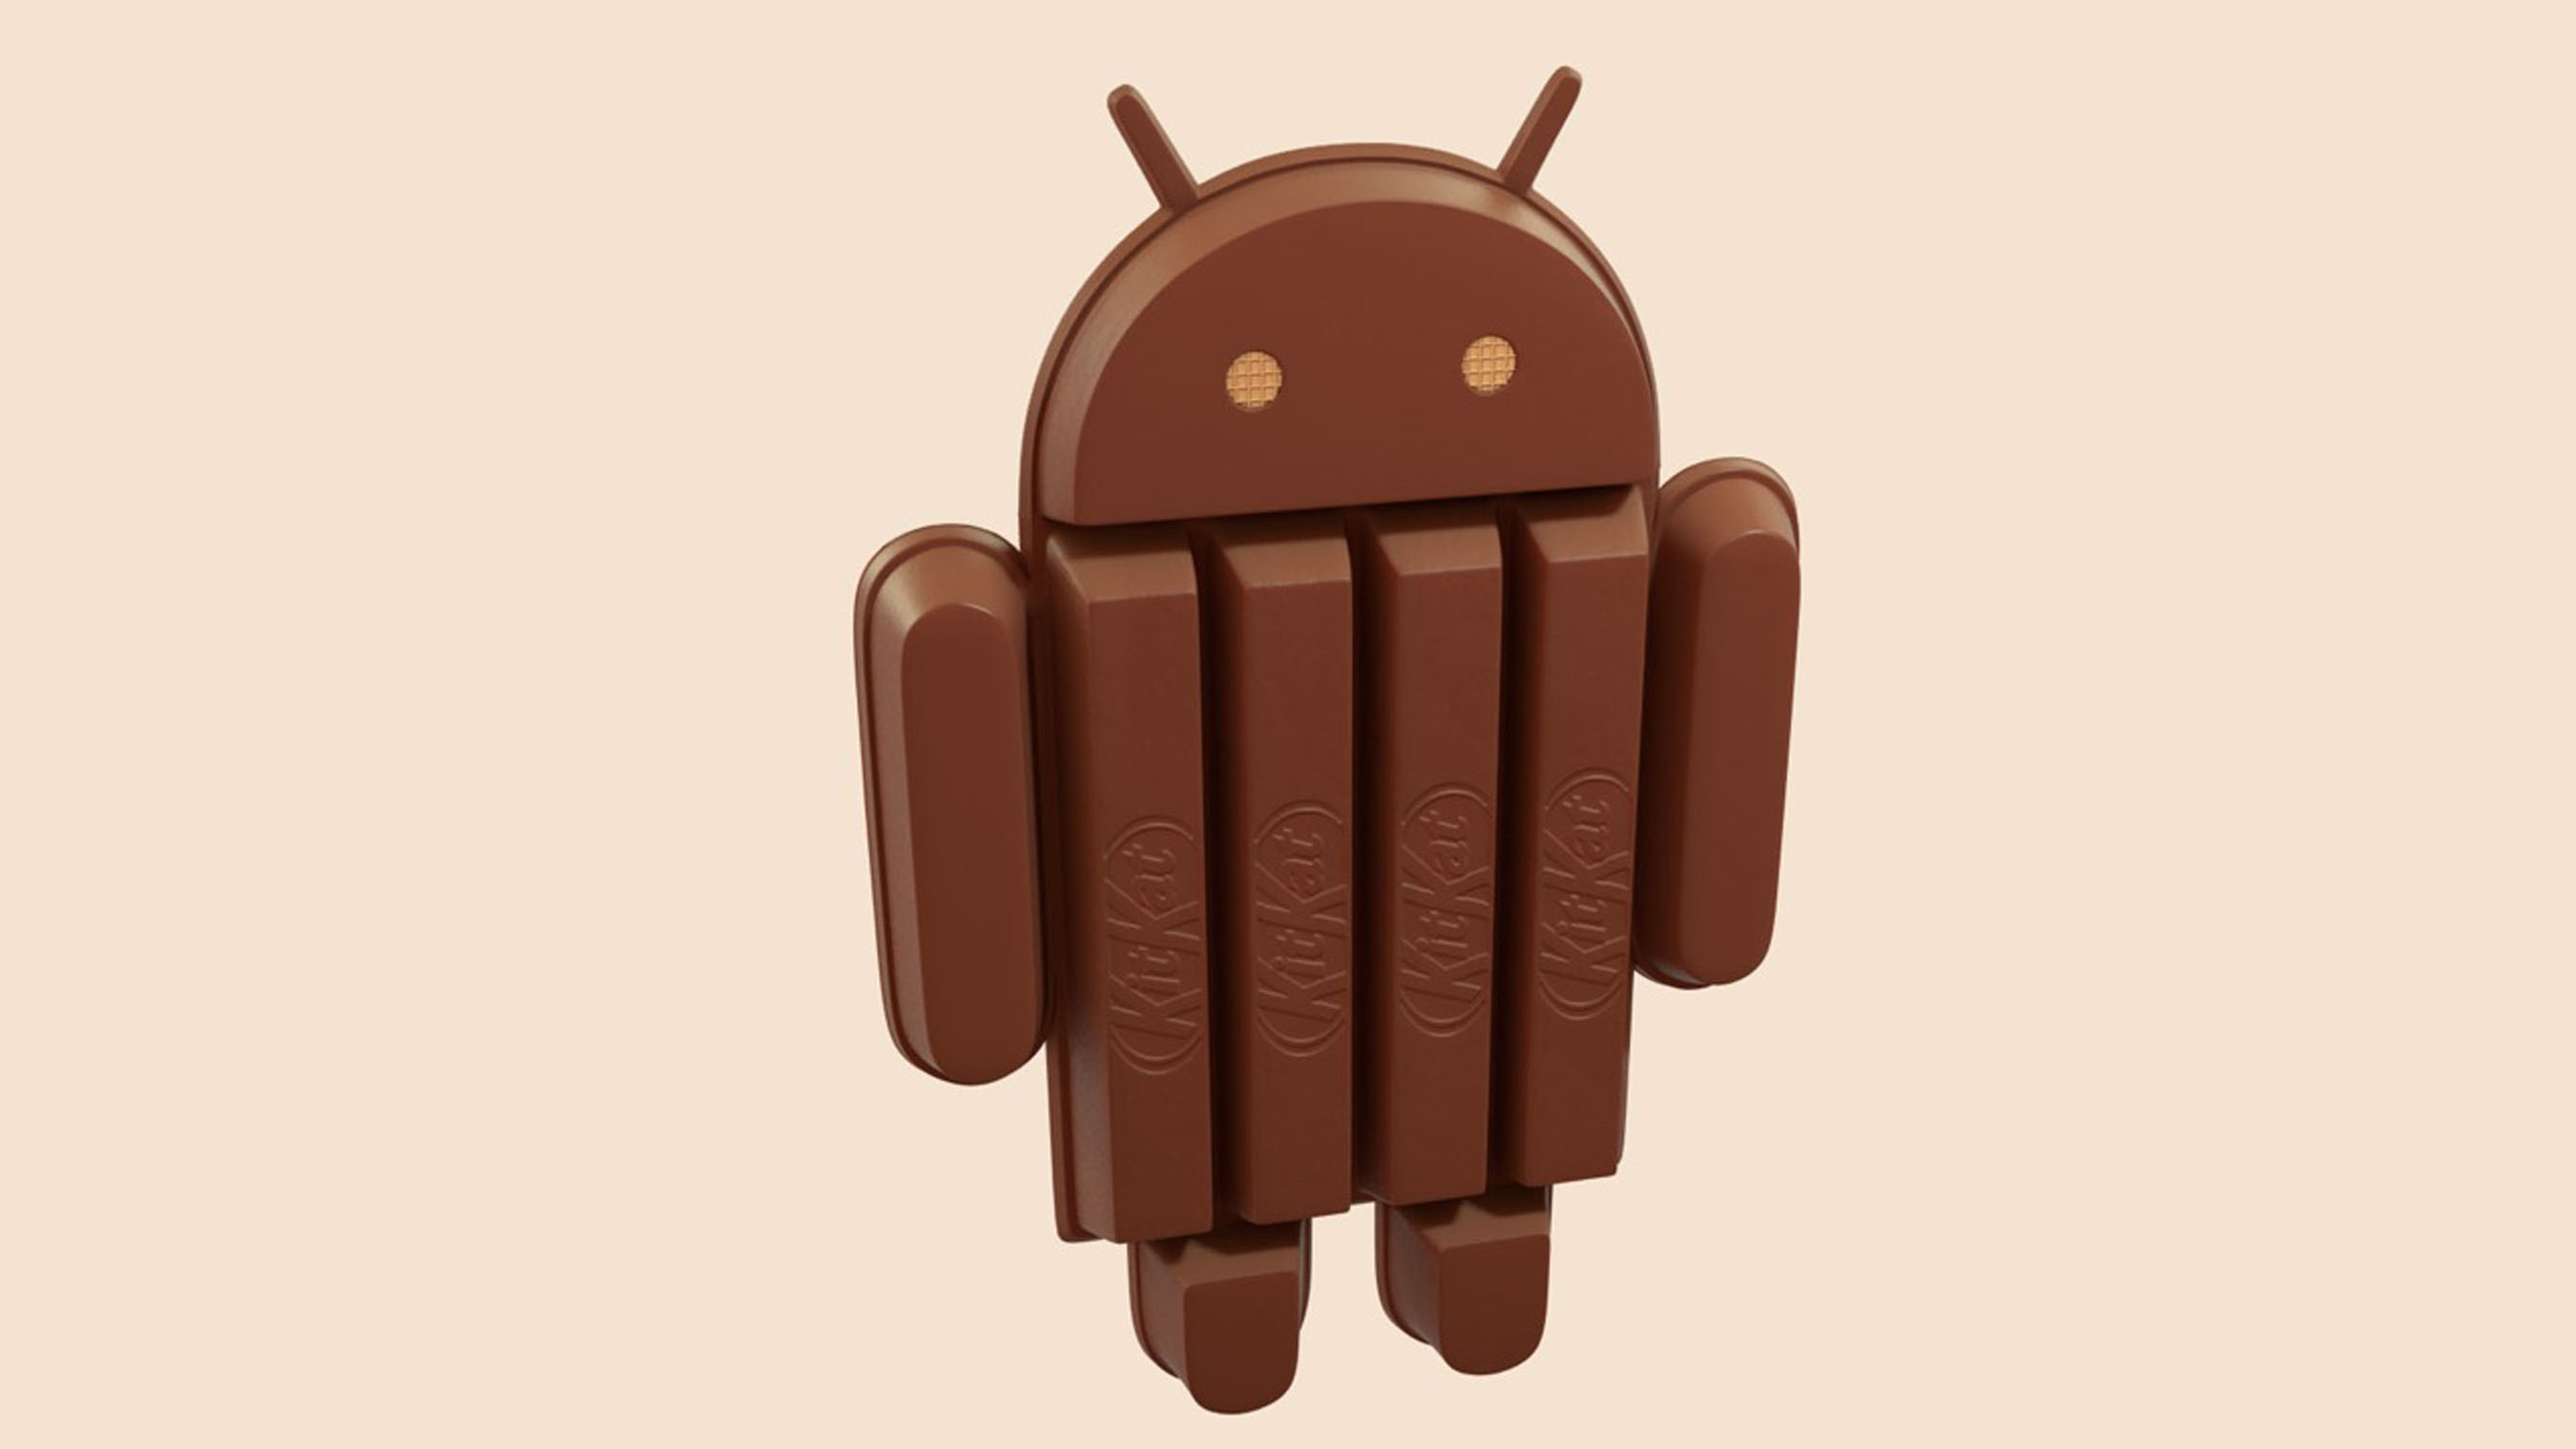 Google announced today the latest version of its Android mobile operating system will be called Android KitKat, after the iconic Kit Kat chocolate bar. (PRNewsFoto/The Hershey Company) (PRNewsFoto/)